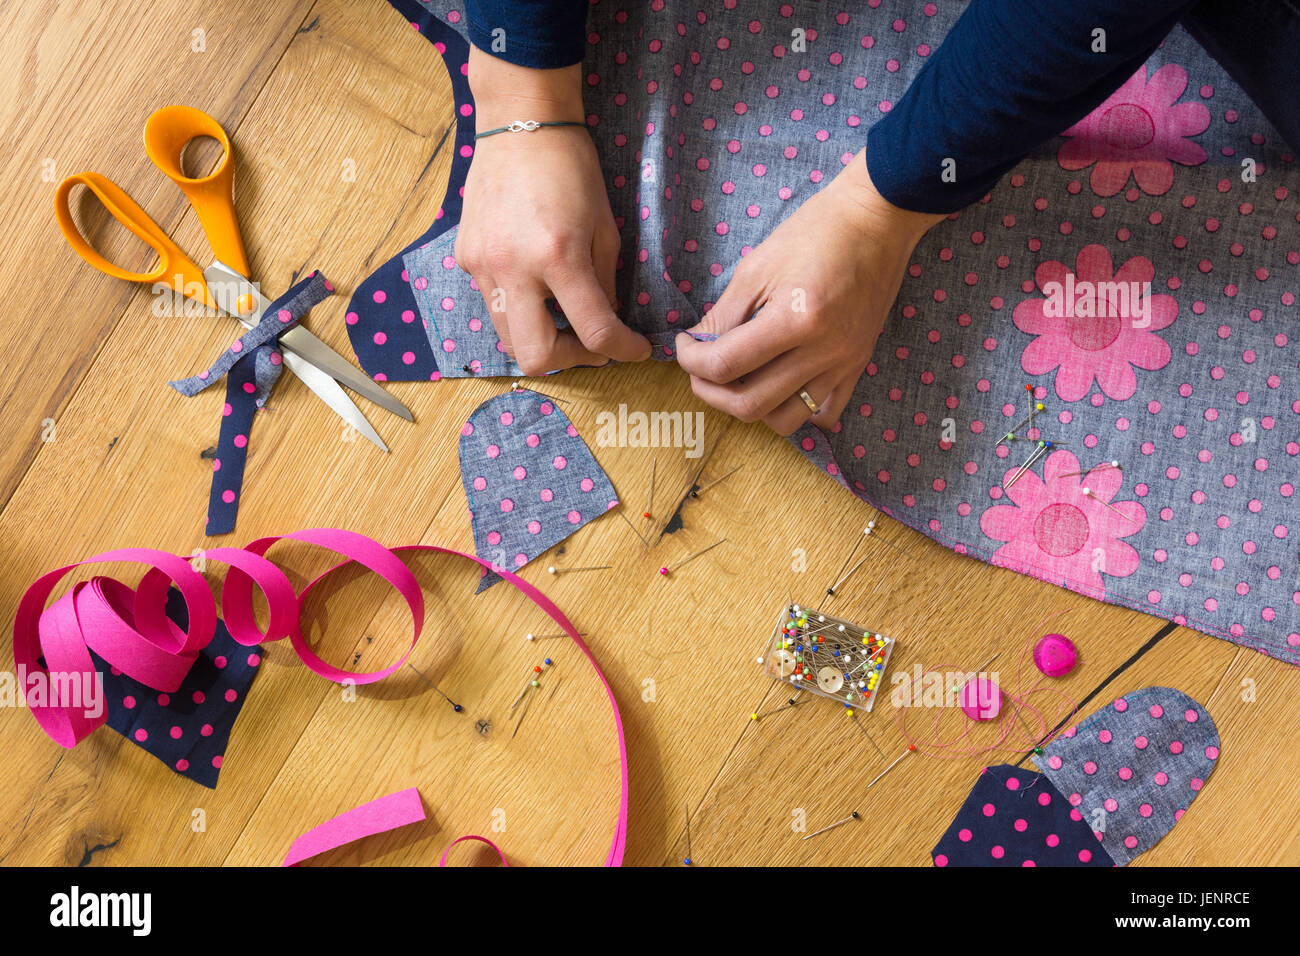 A young woman pinning some cloth for making a dress. Theme: hobbies, hobby, arts and crafts, creative, sewing, embroidery Stock Photo